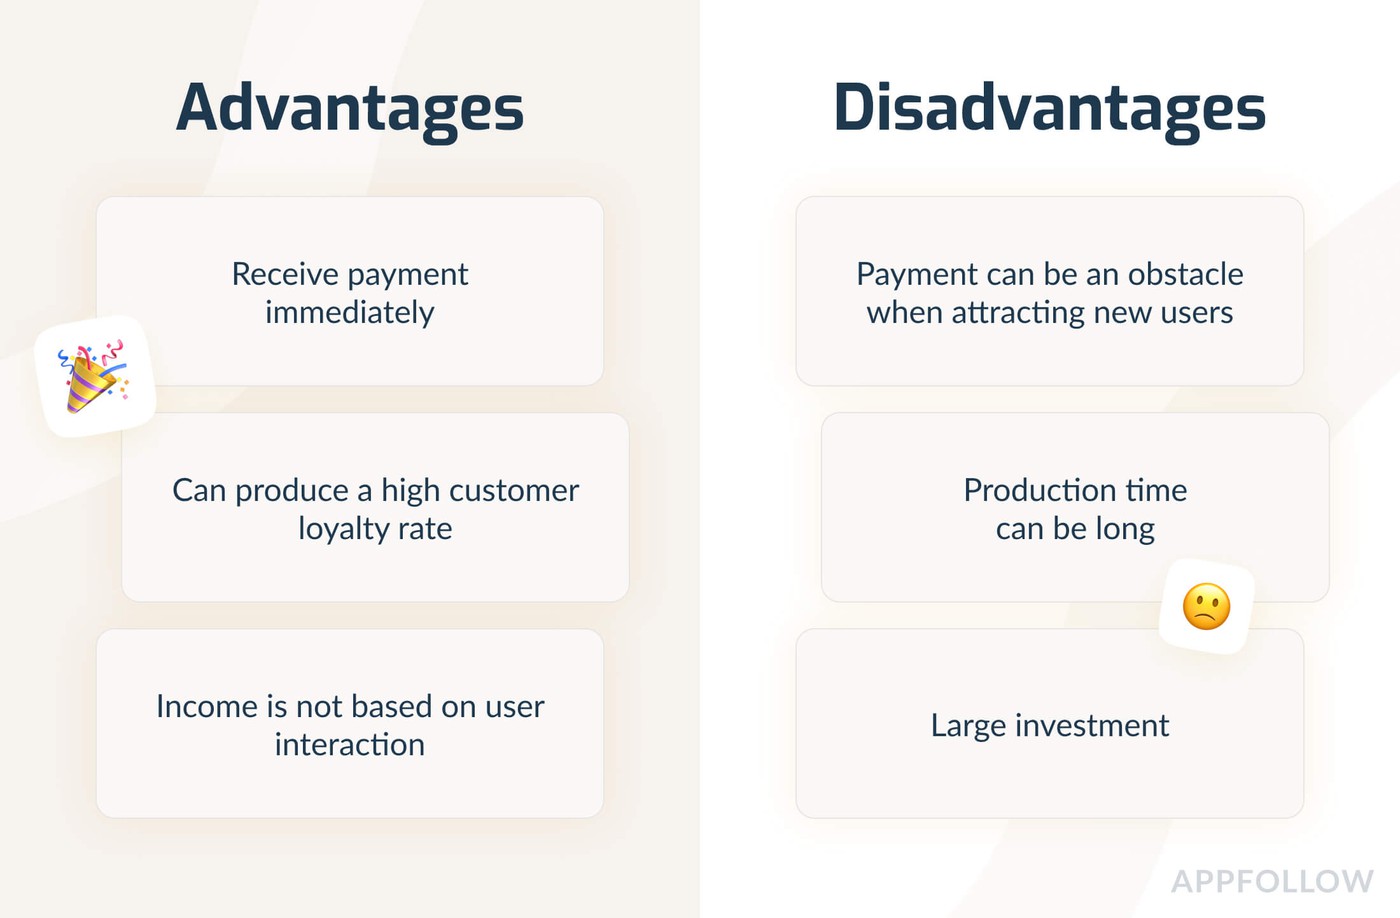 Advantages and disadvantages of choosing a paid app pricing strategy